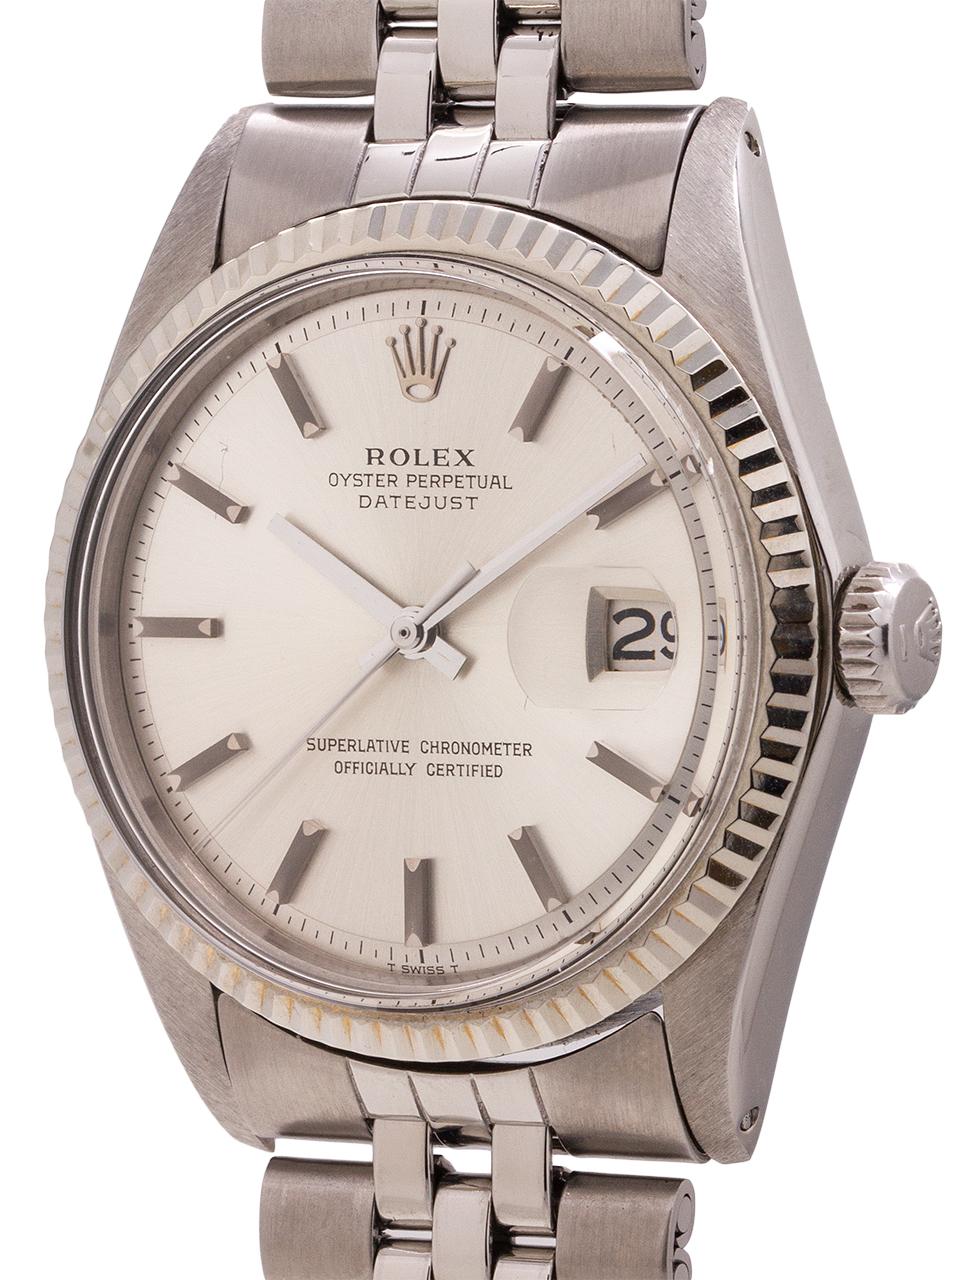 Rolex Stainless Steel Datejust ref # 1601 serial# 12.4 million circa 1968. 36mm diameter case with 14K white gold fluted bezel and acrylic crystal. Original silvered satin pie pan dial with applied silver indexes and silver baton hands. Powered by